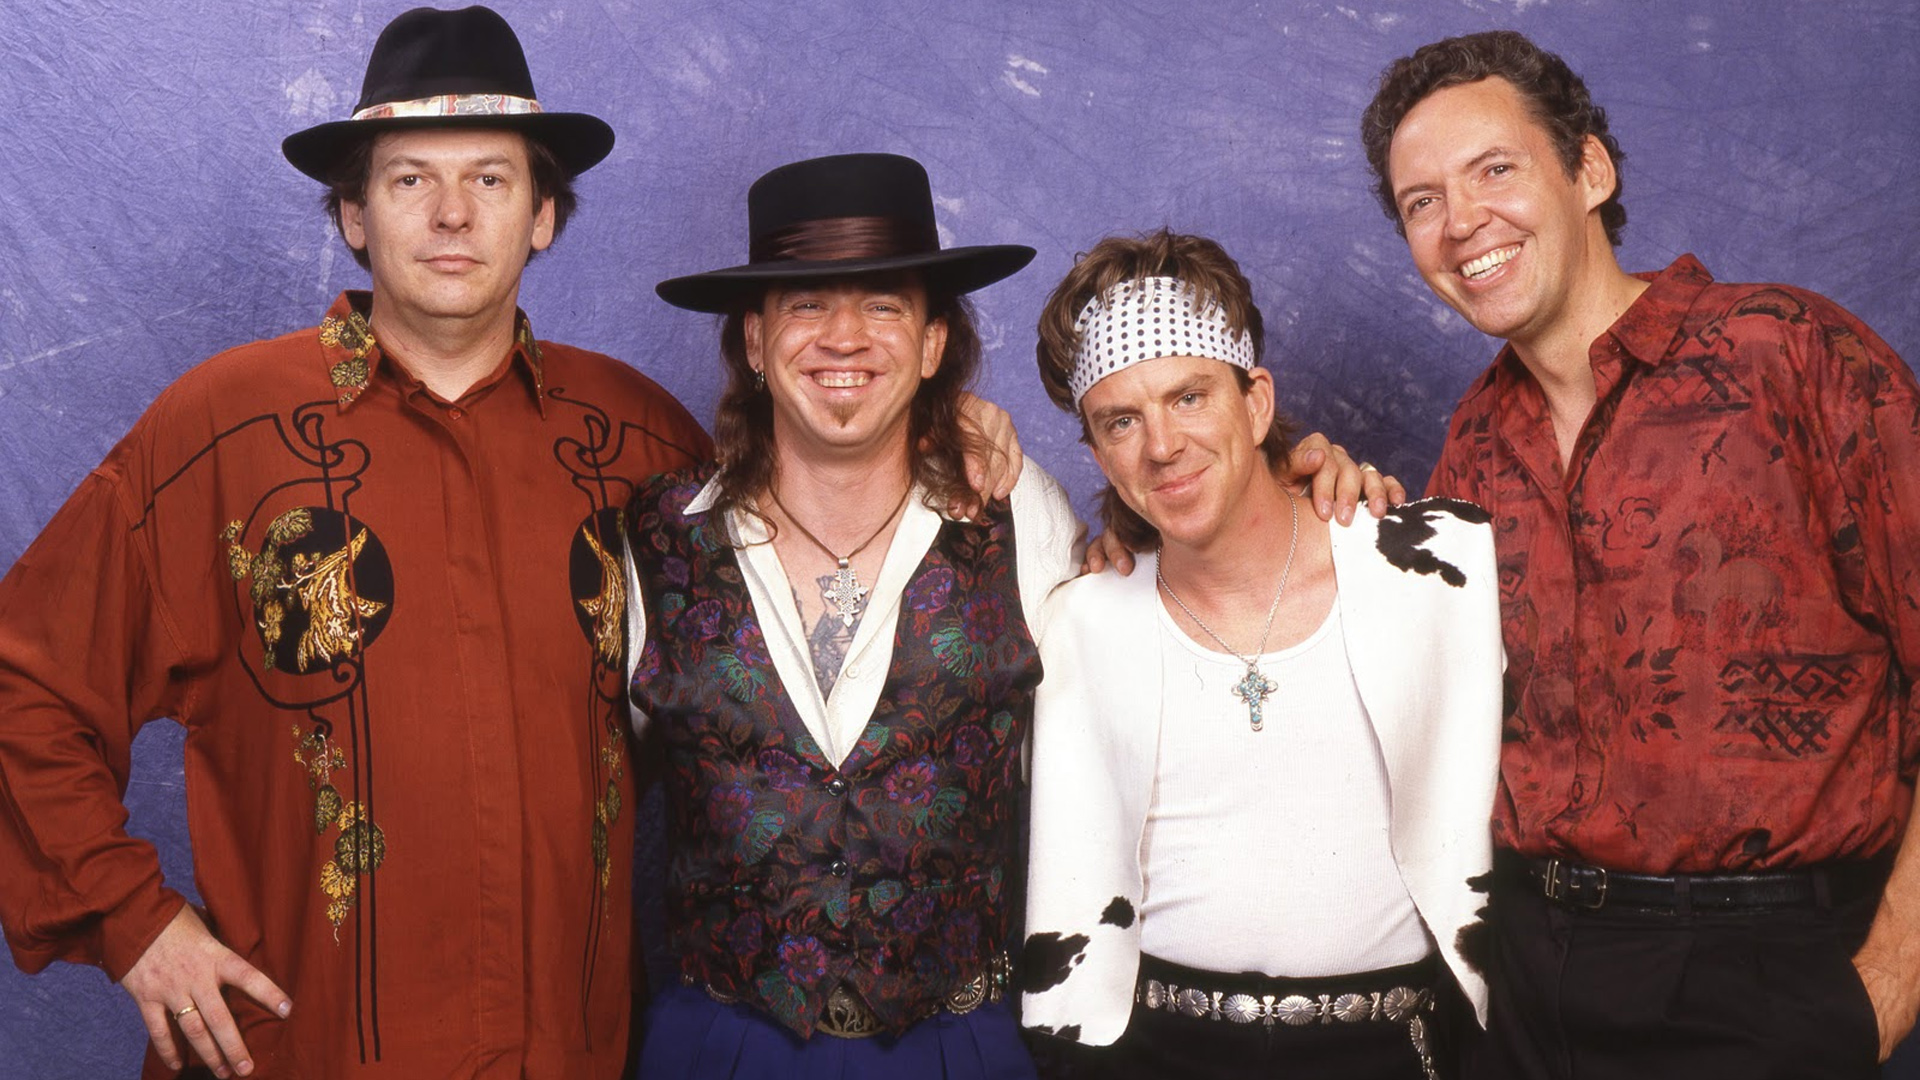 Stevie Ray Vaughan and Double Trouble backdrop wallpaper